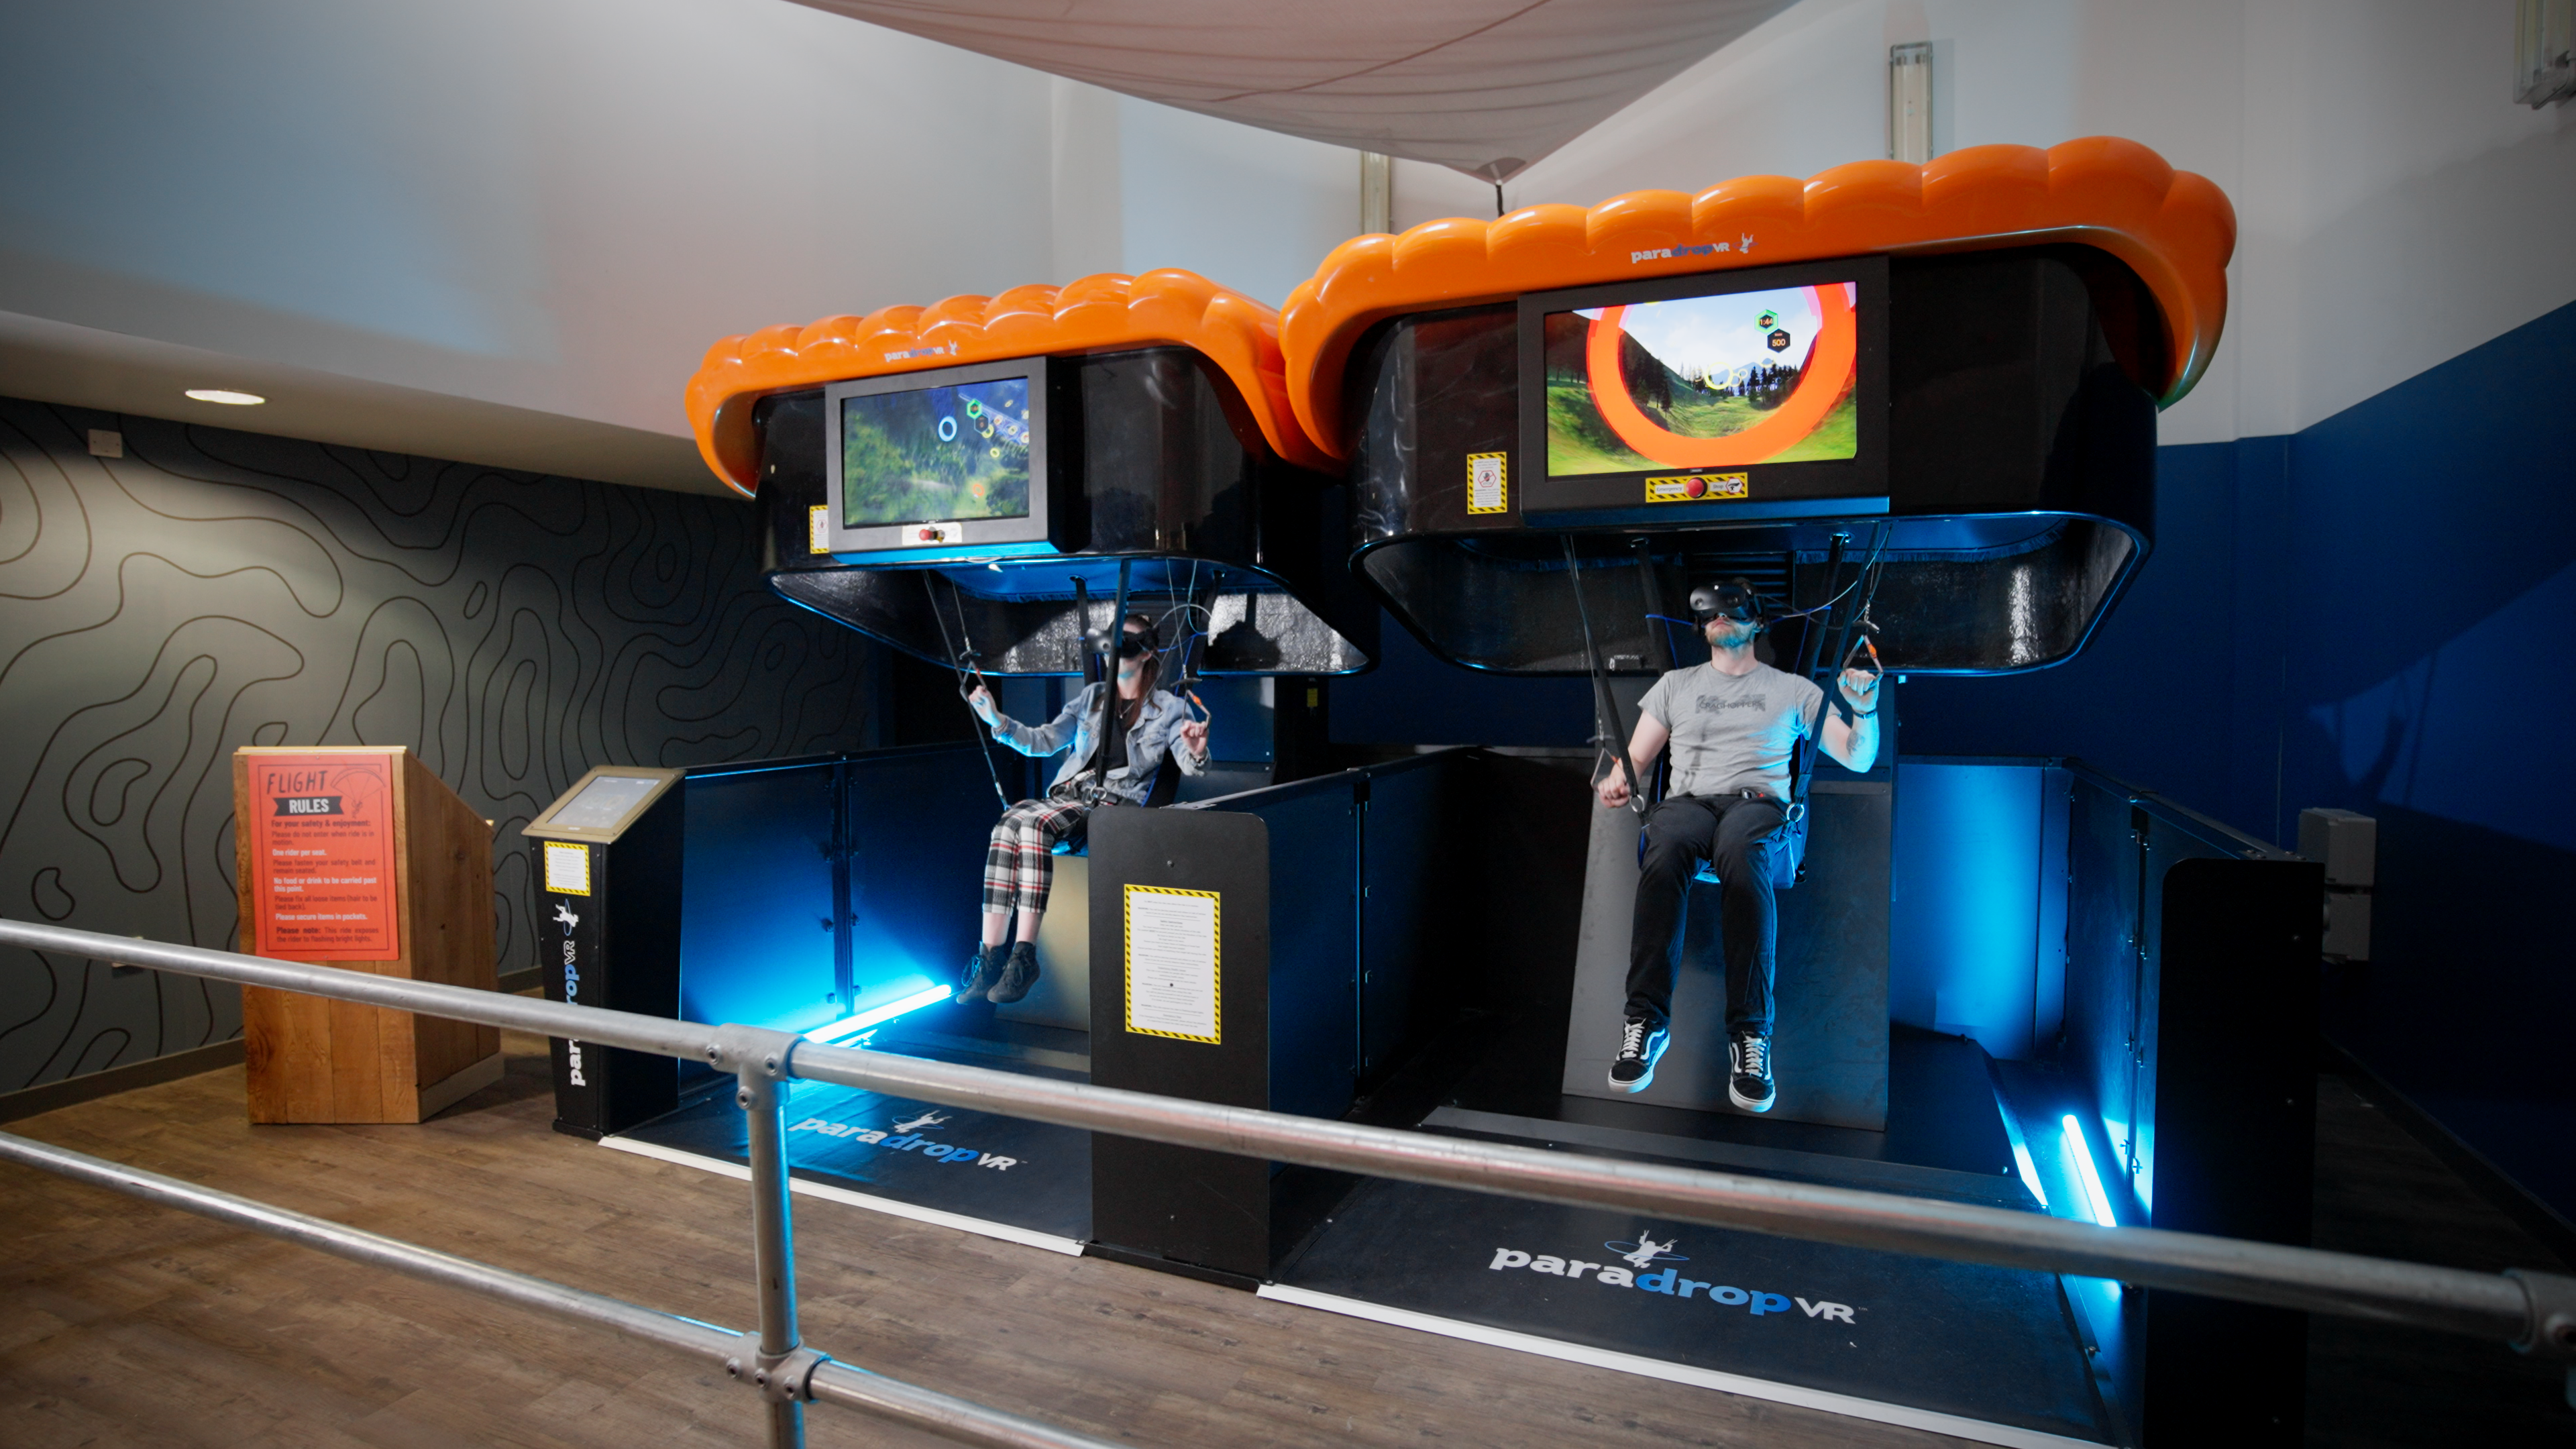 Don’t miss flying ParadropVR at IAAPA Europe!